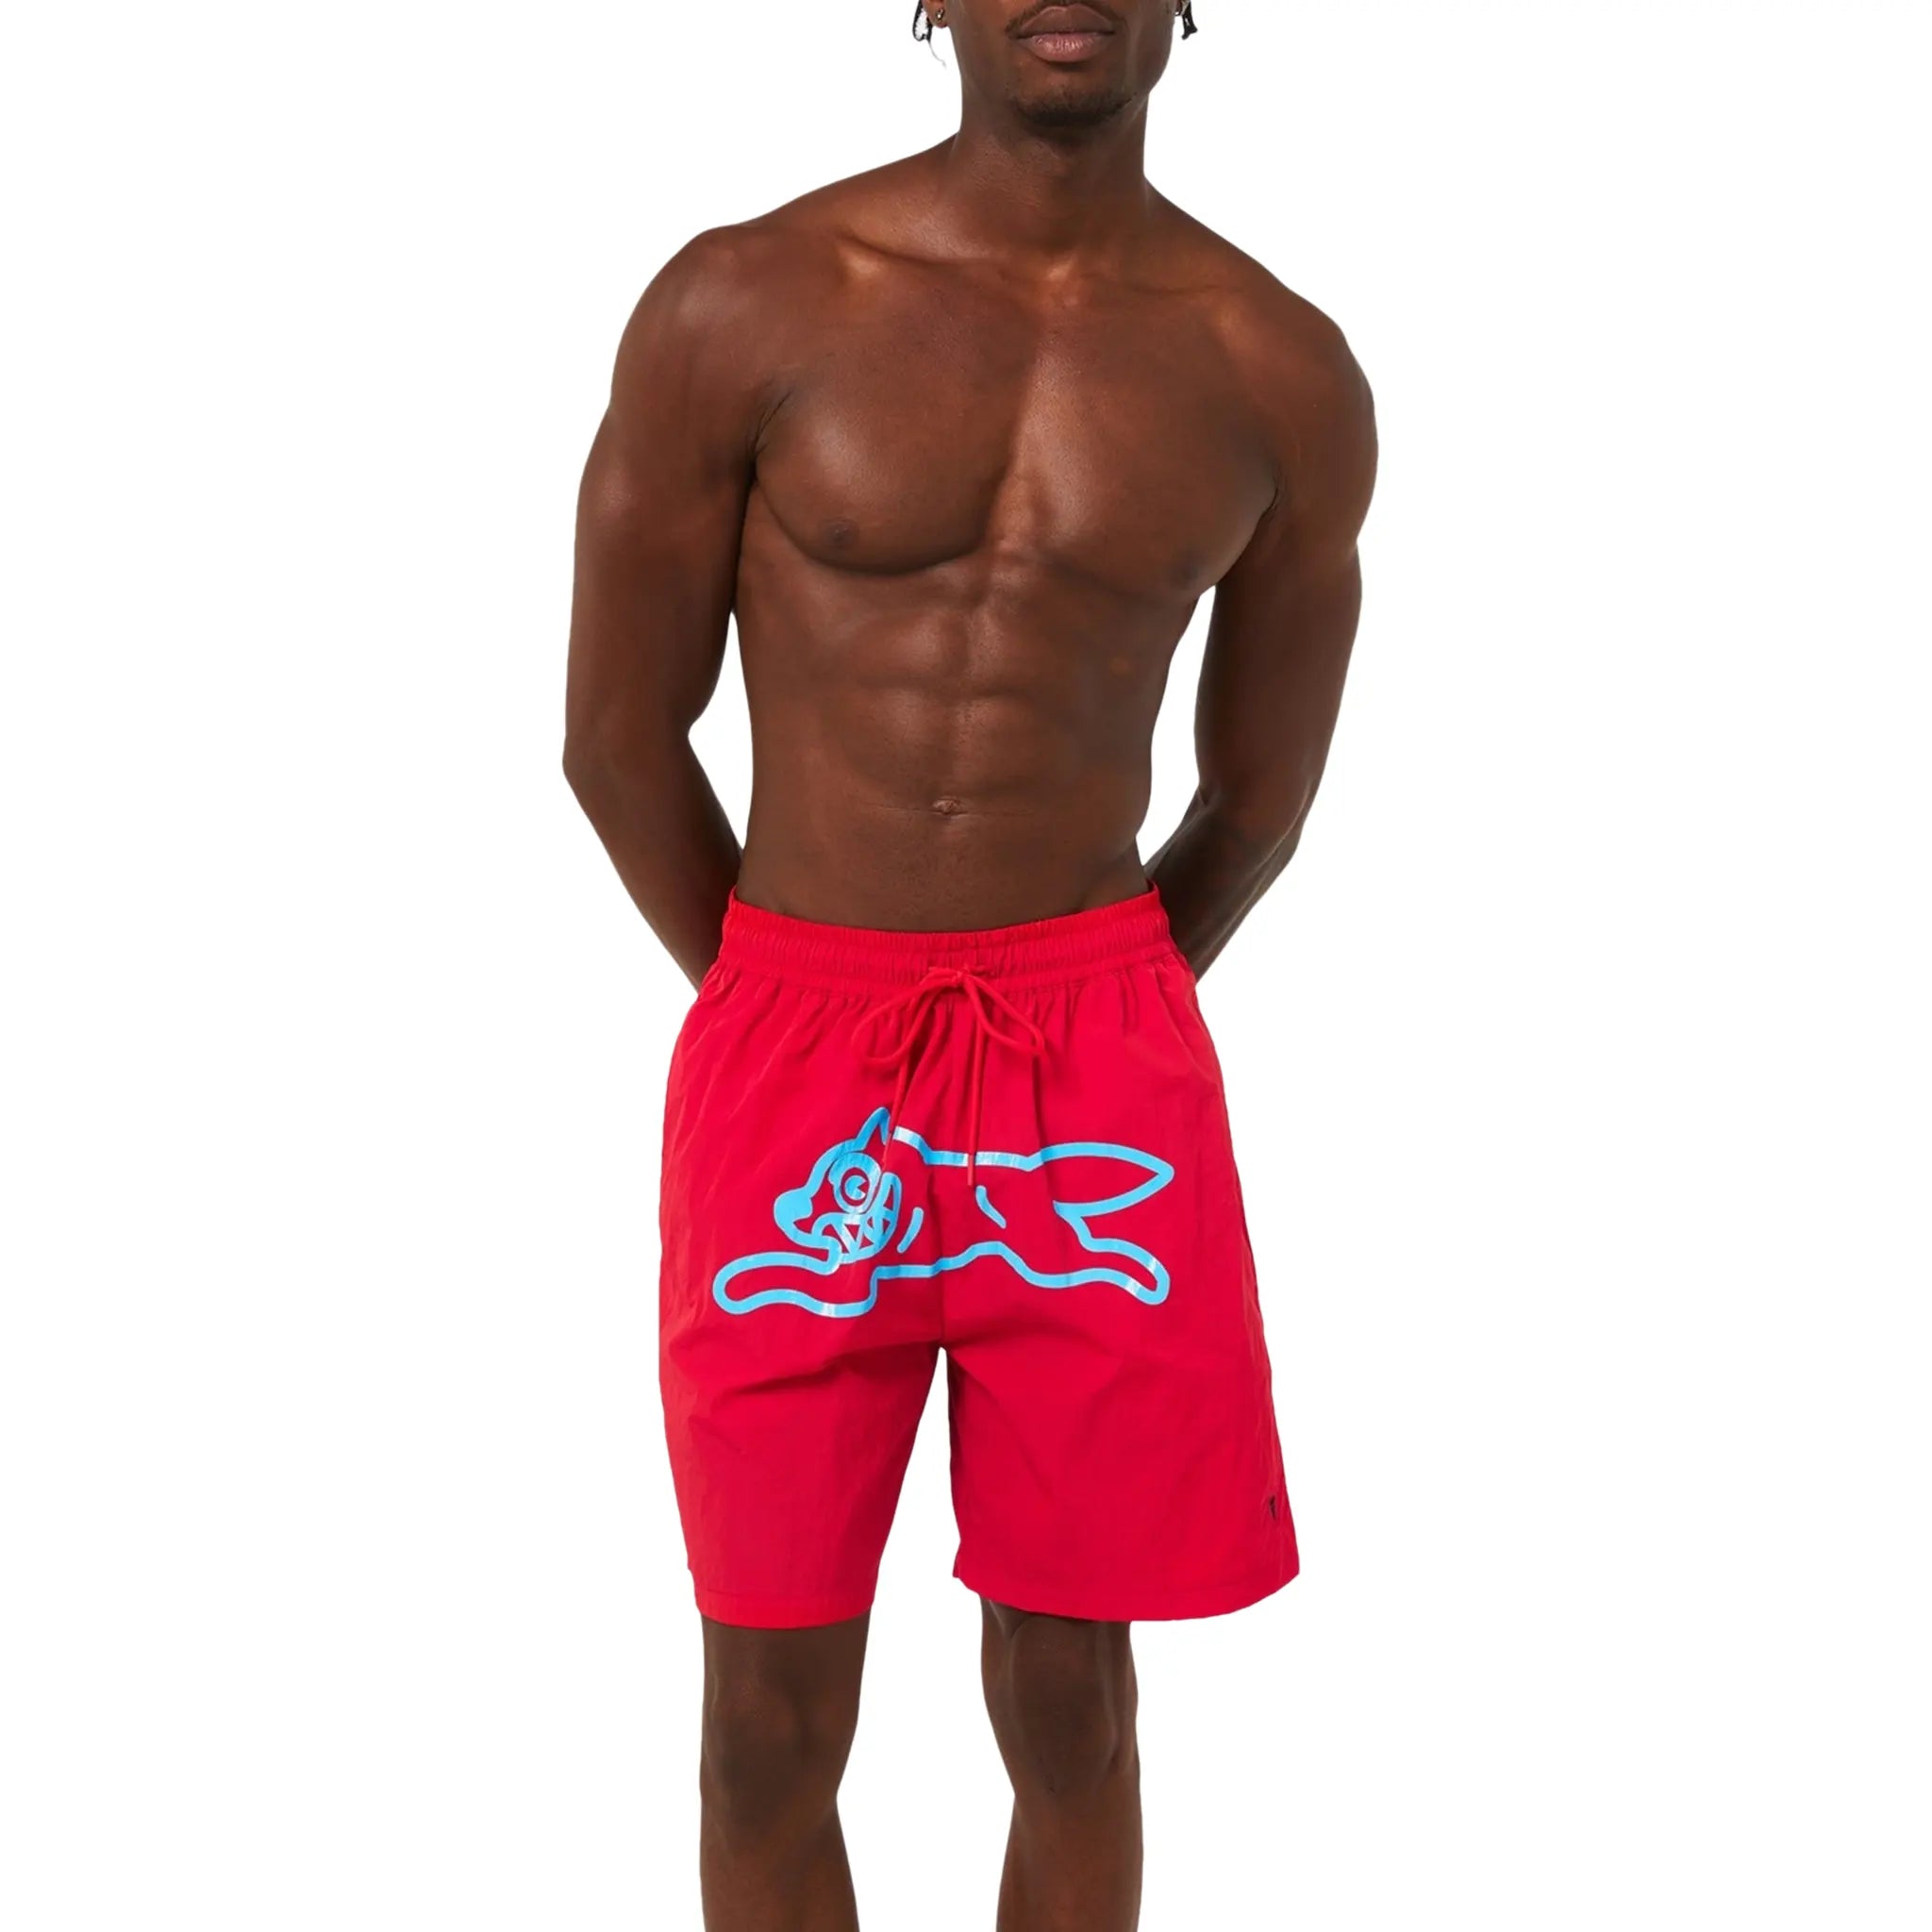 Front Detail view of Icecream IC Run Dog Red Swim Shorts ic23214-red